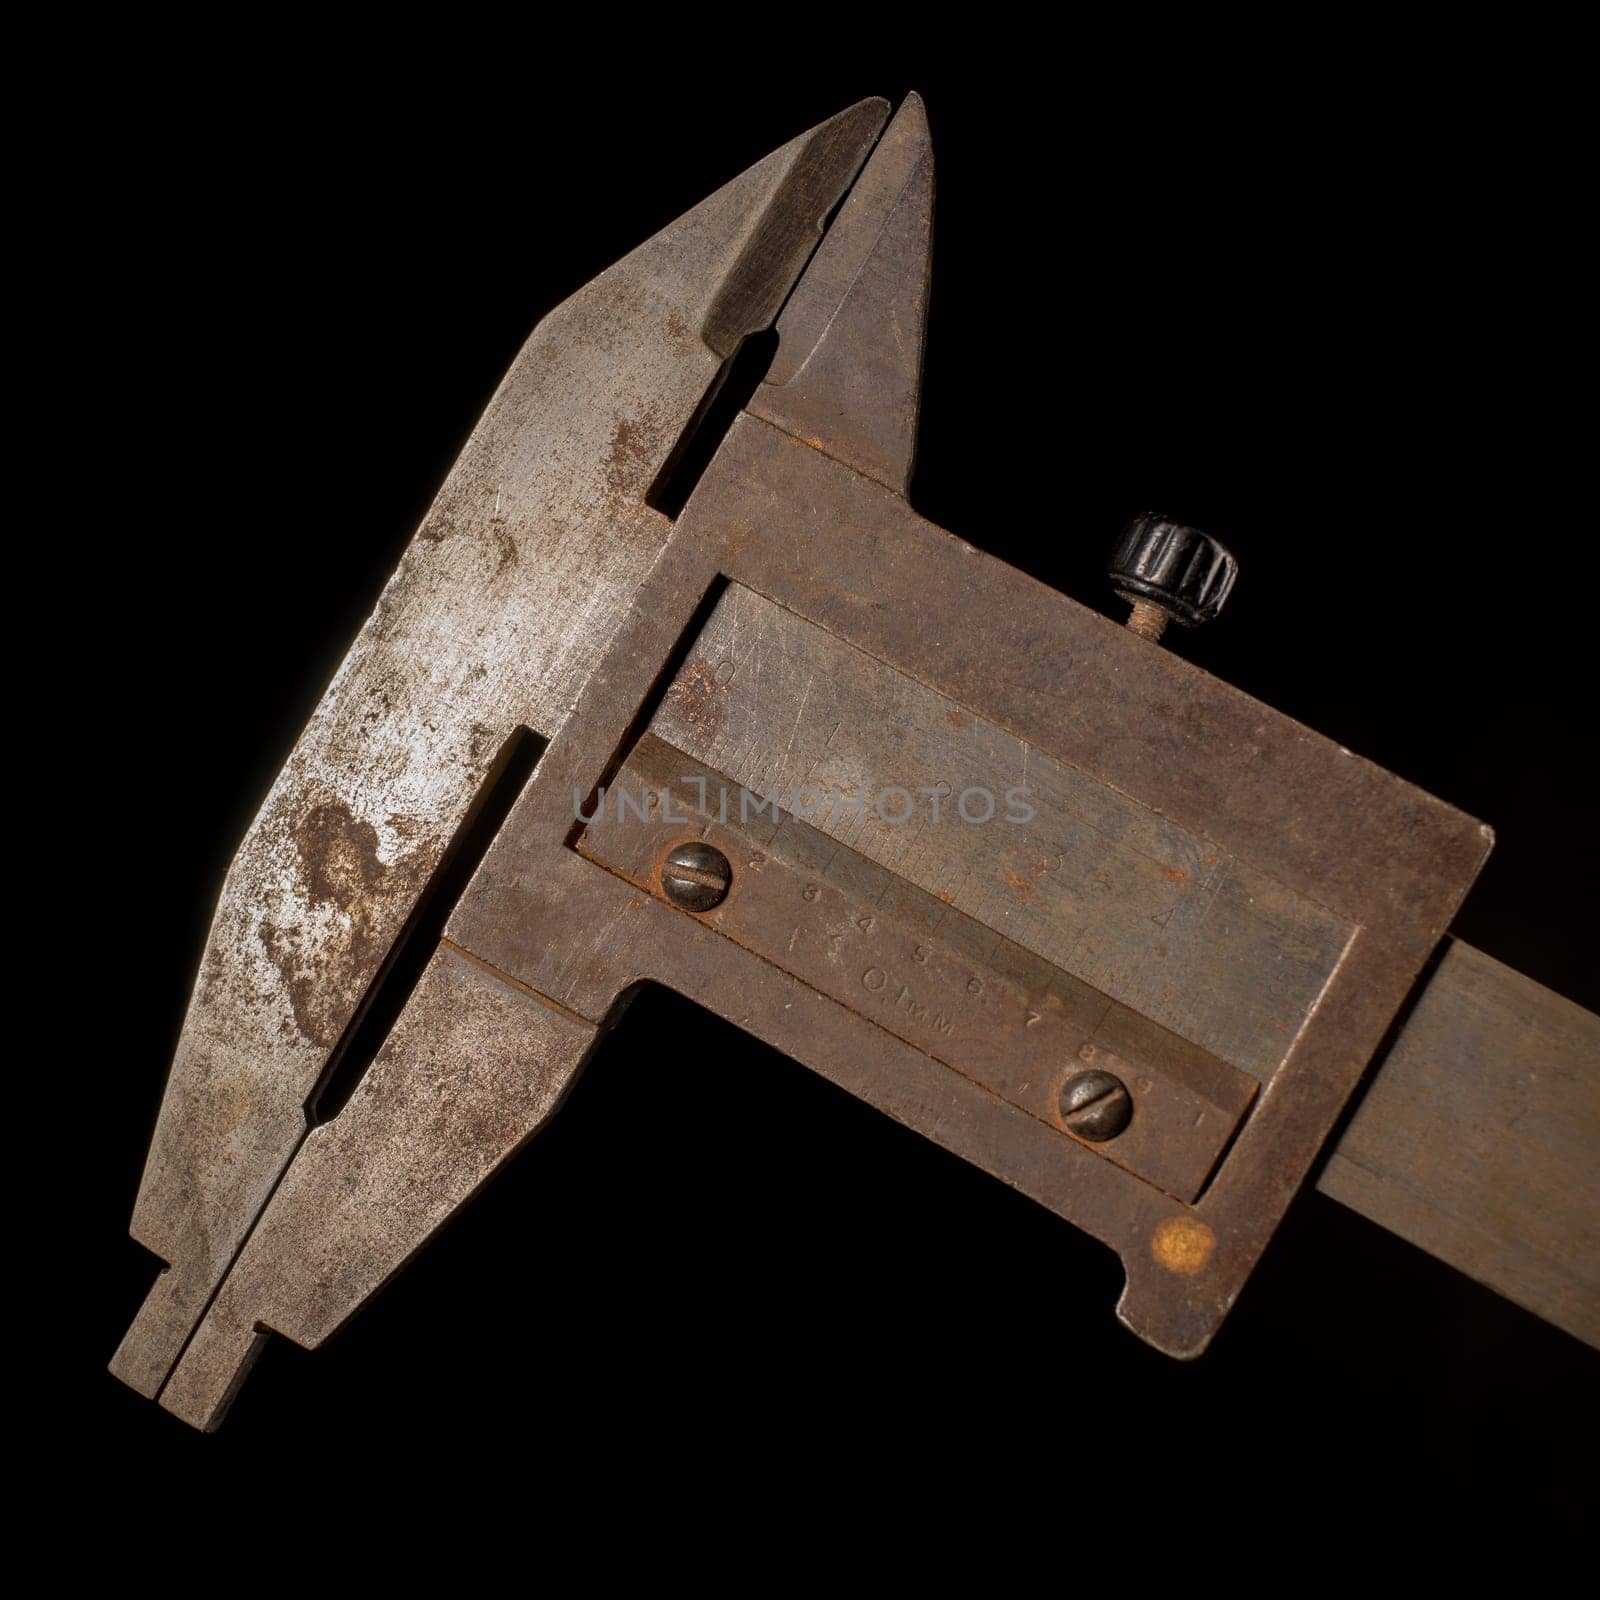 Old tools in front of a black background